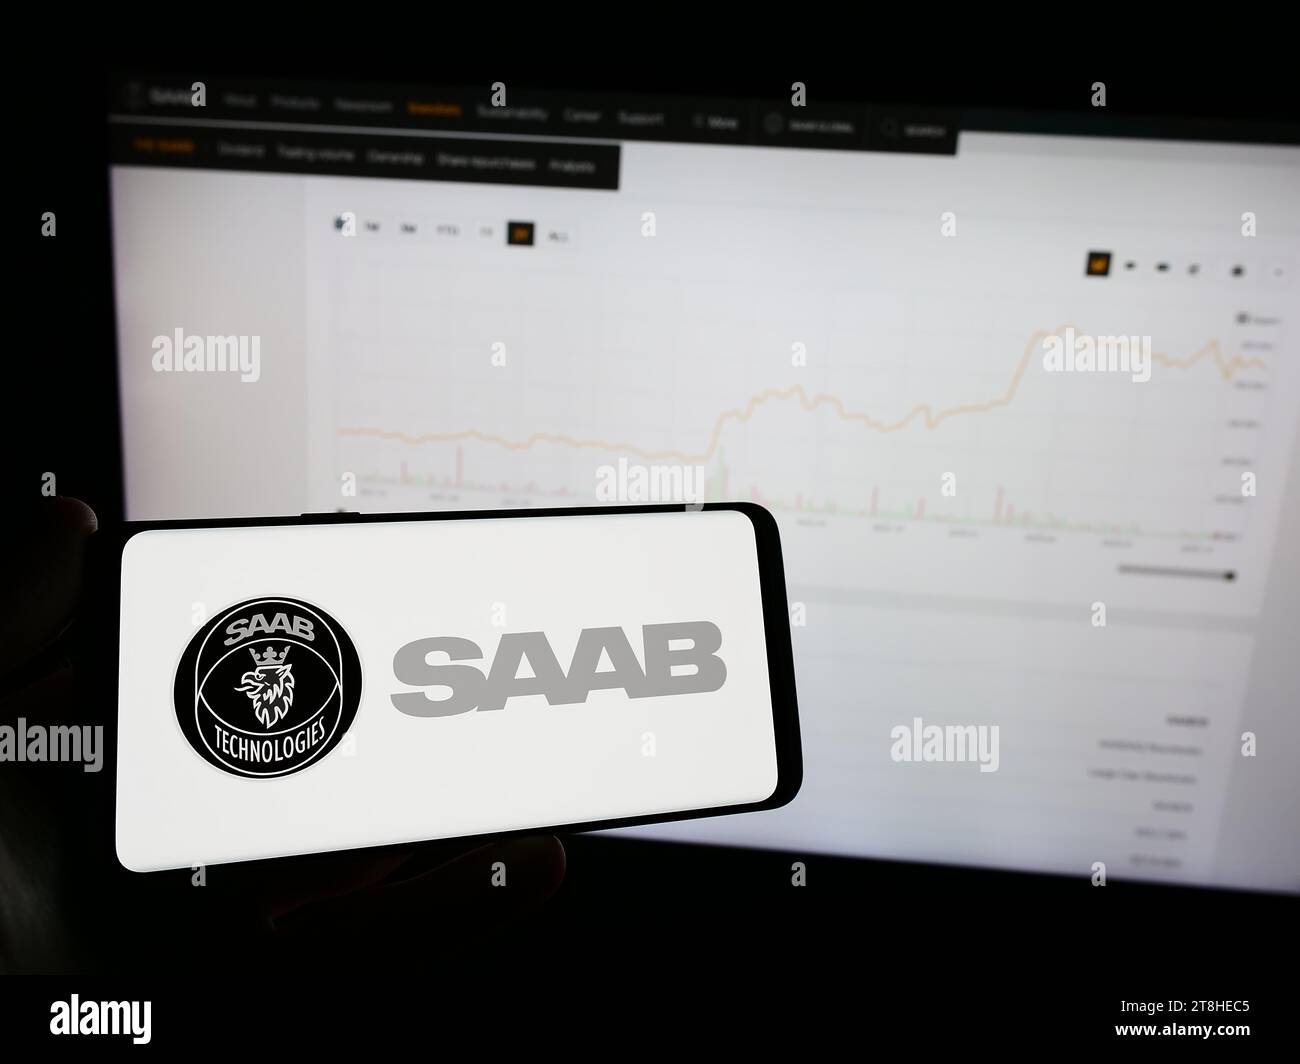 Person holding mobile phone with logo of Swedish aerospace and defense company Saab AB in front of business web page. Focus on phone display. Stock Photo